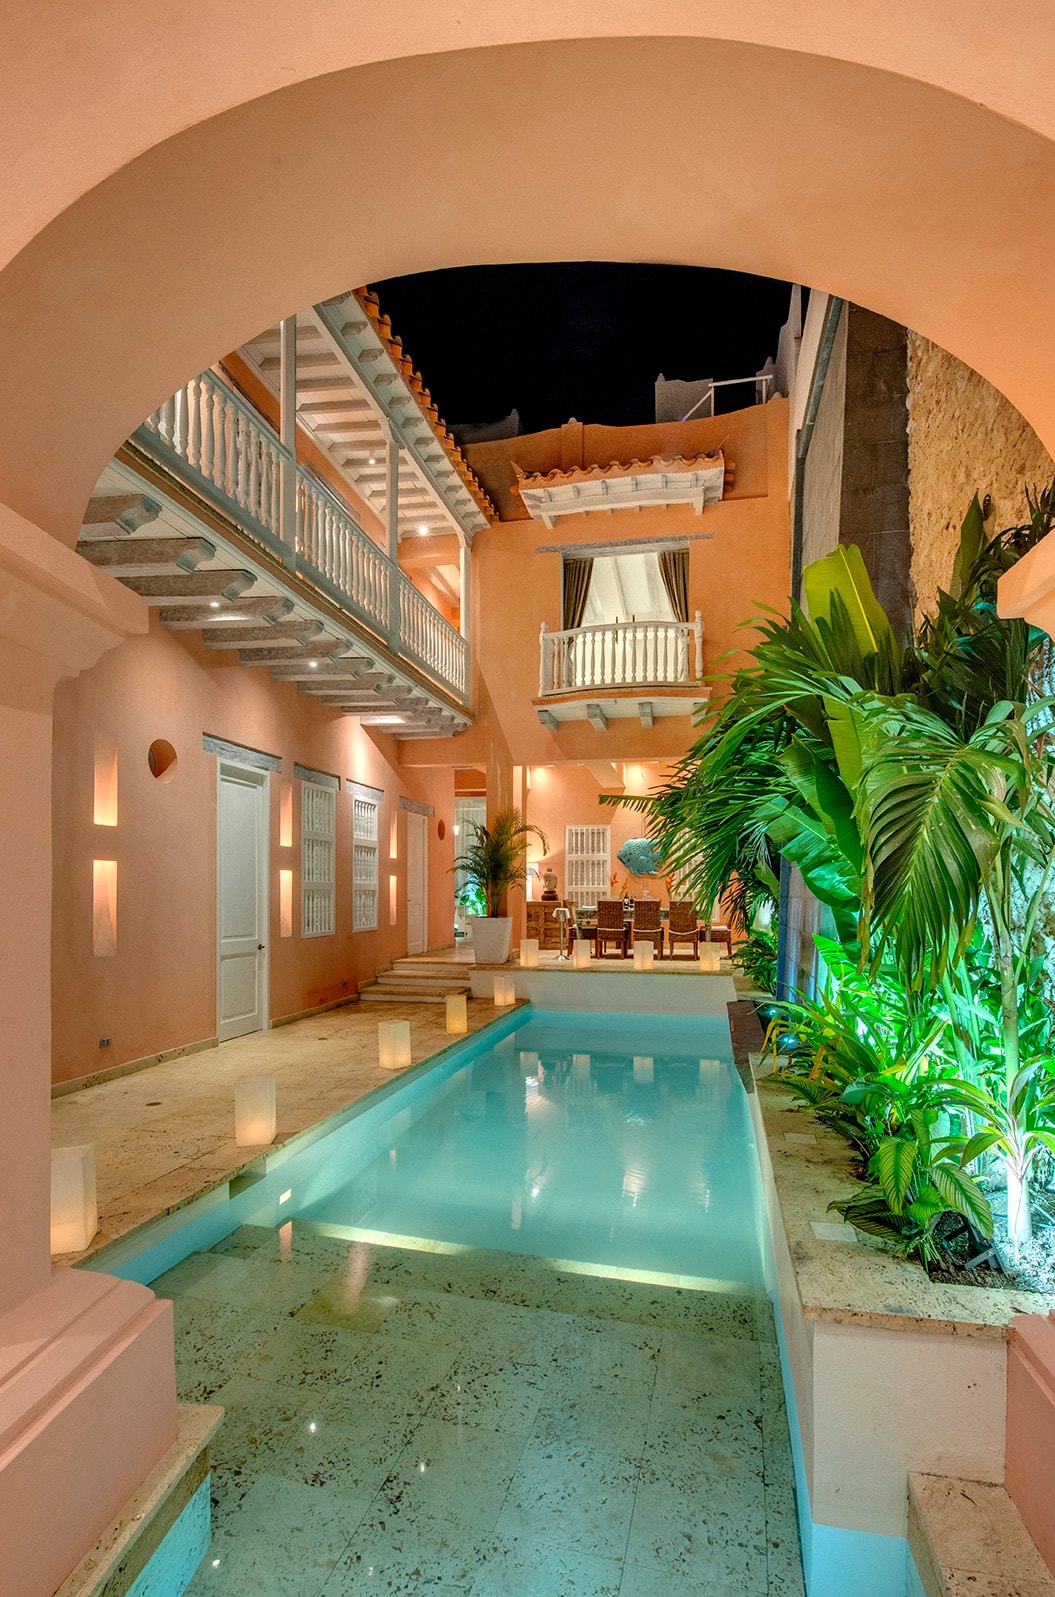 Upper House Old City 9BR Lux Mansion/Rooftop2pools